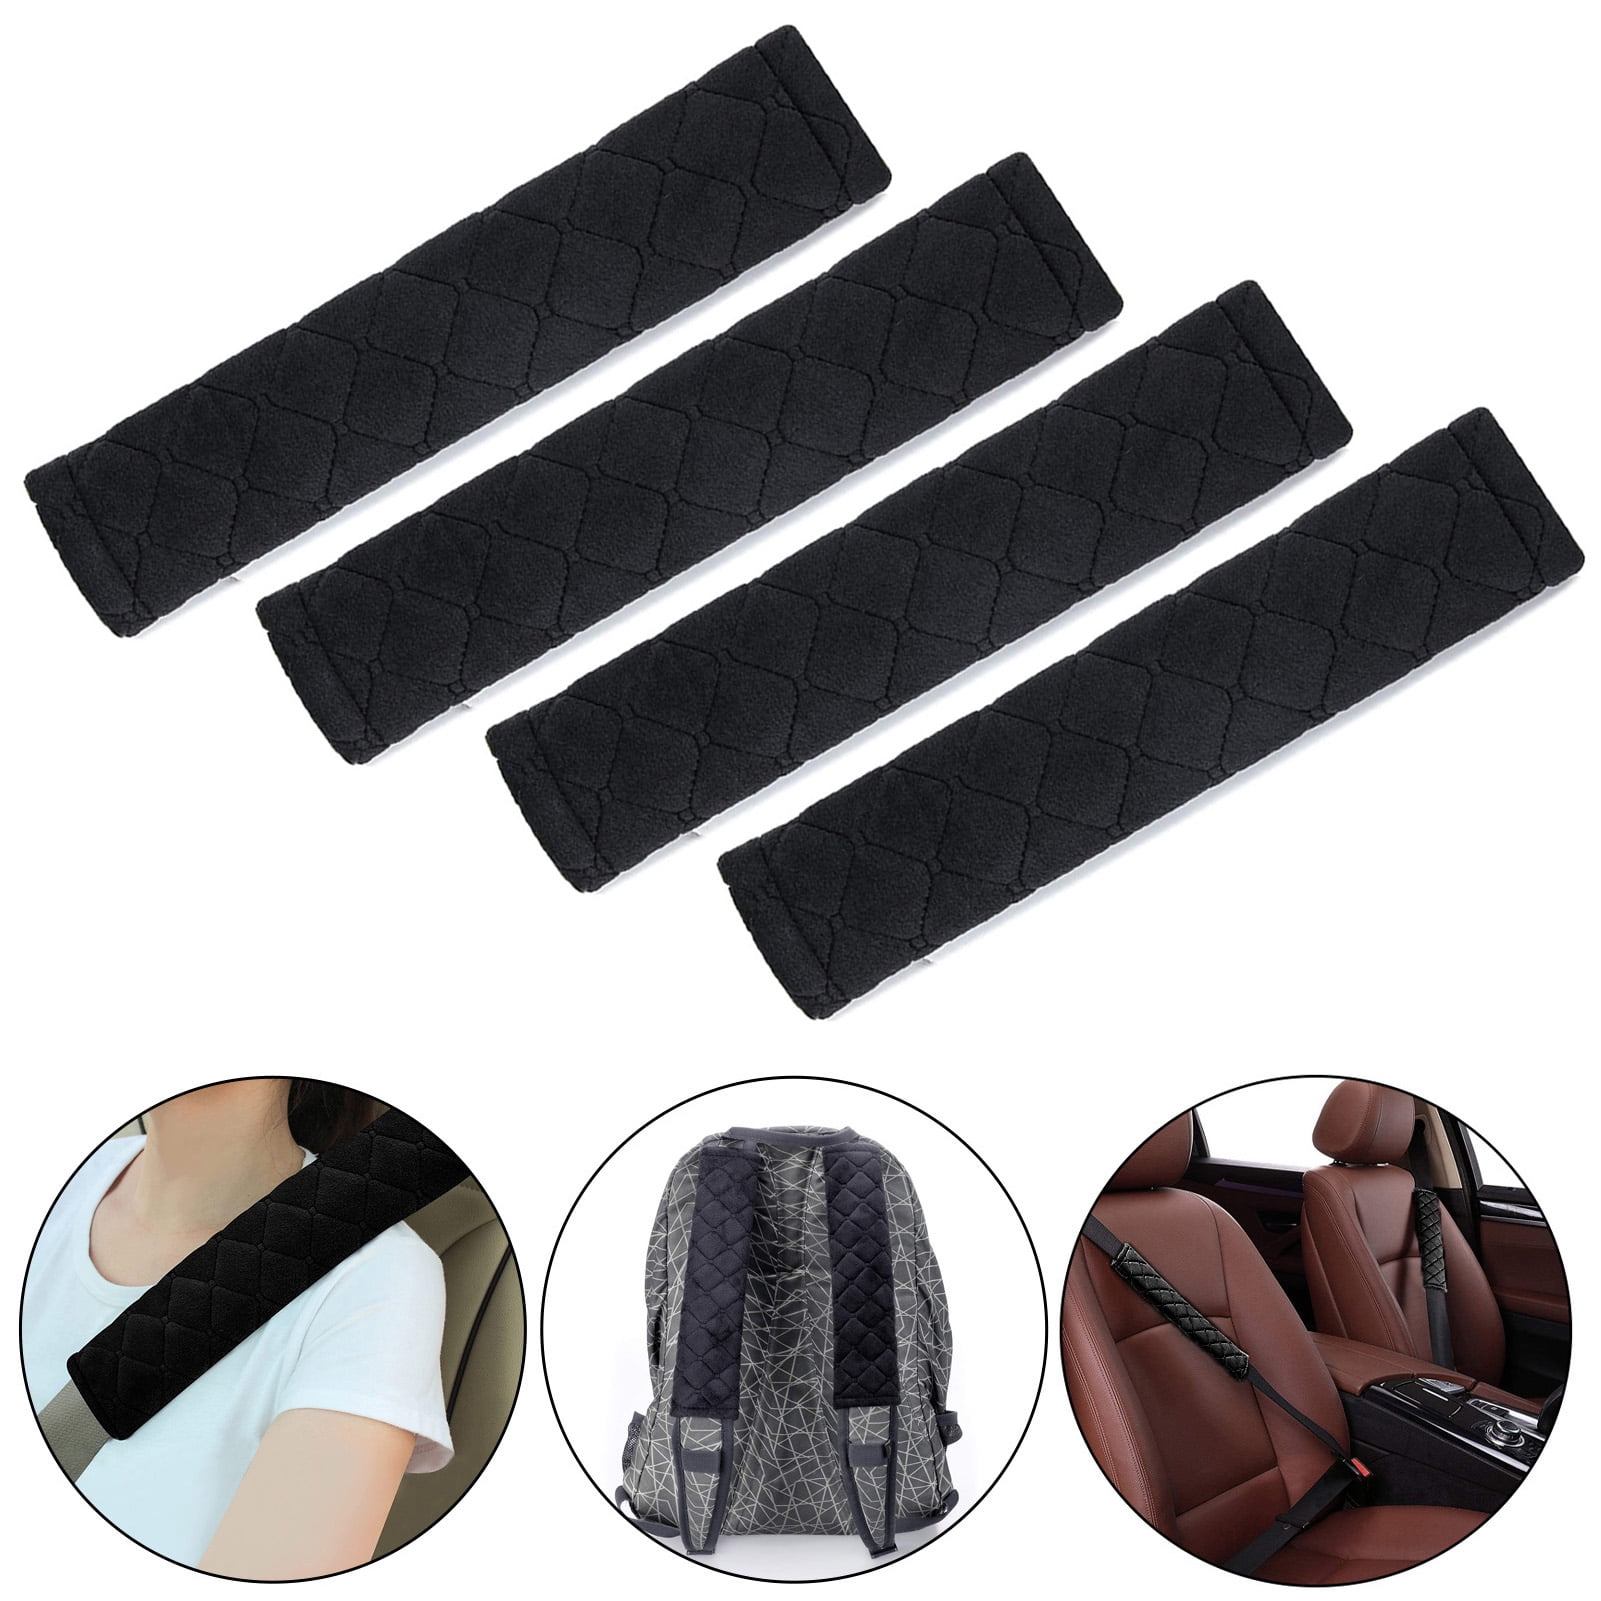 4pcs M Black Universal Car Seat Belt Pads Cover,Seat Belt Shoulder Strap Covers Harness Pad for Car/Bag,Soft Comfort Helps Protect You Neck and Shoulder from The Seat Belt Rubbing 